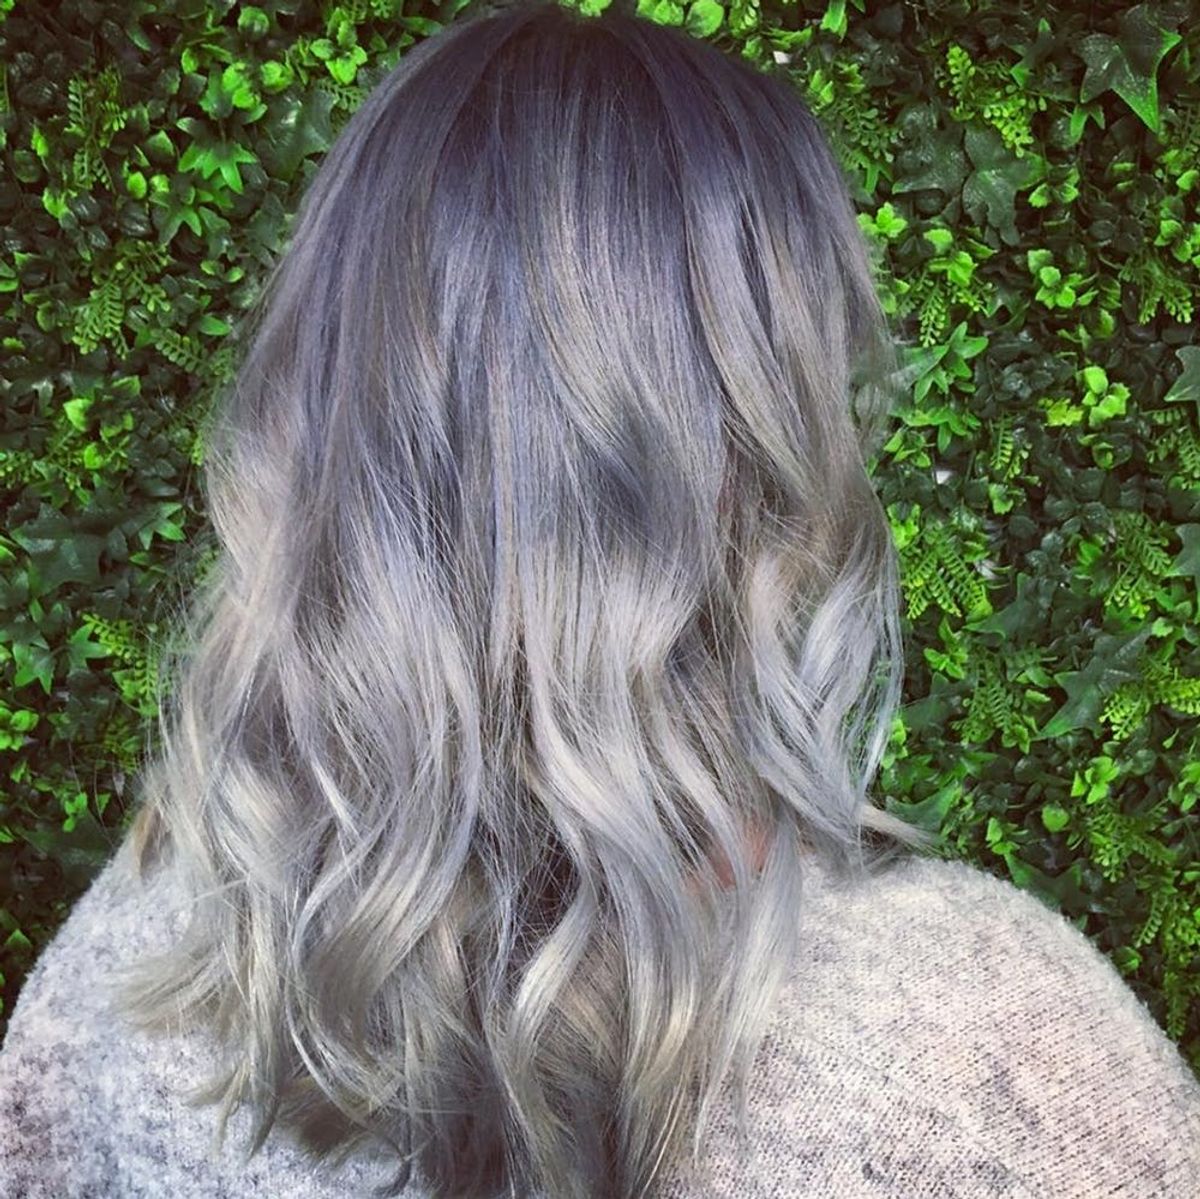 Grombré Is the Fall Hair Trend You Need to Try